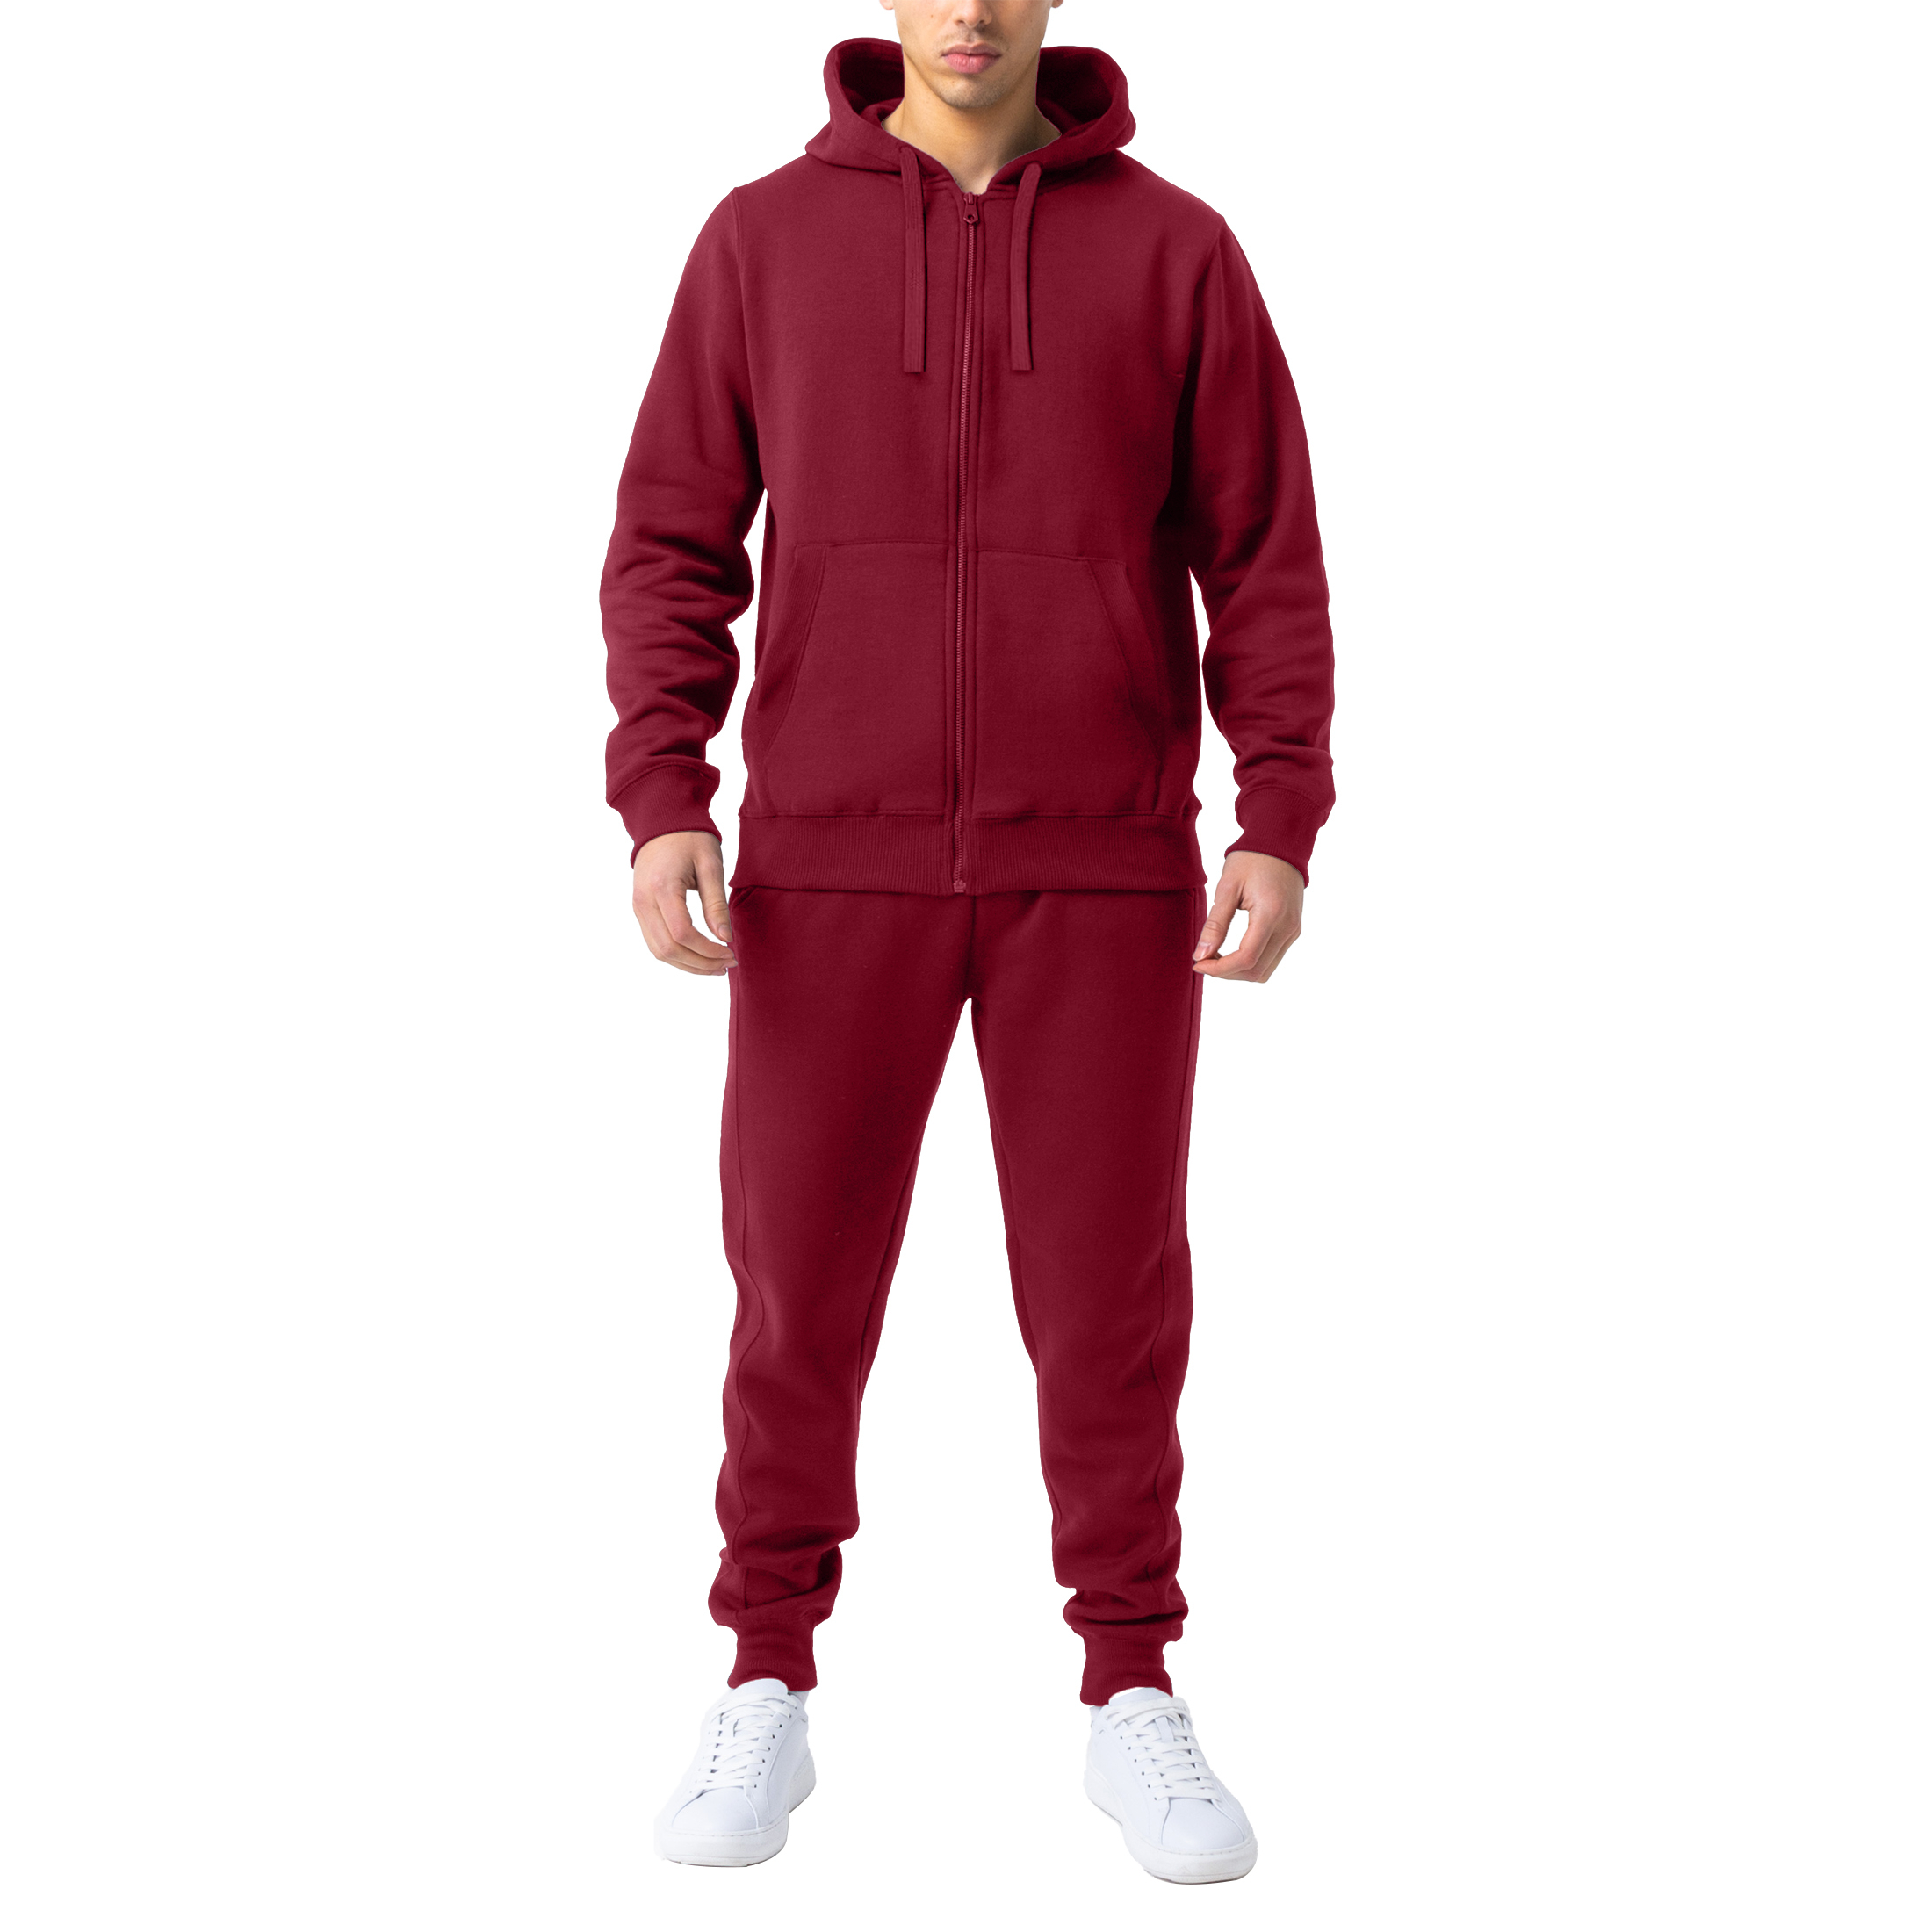 Men's Casual Jogging Athletic Active Full Zip Up Tracksuit - Red, 3X-Large